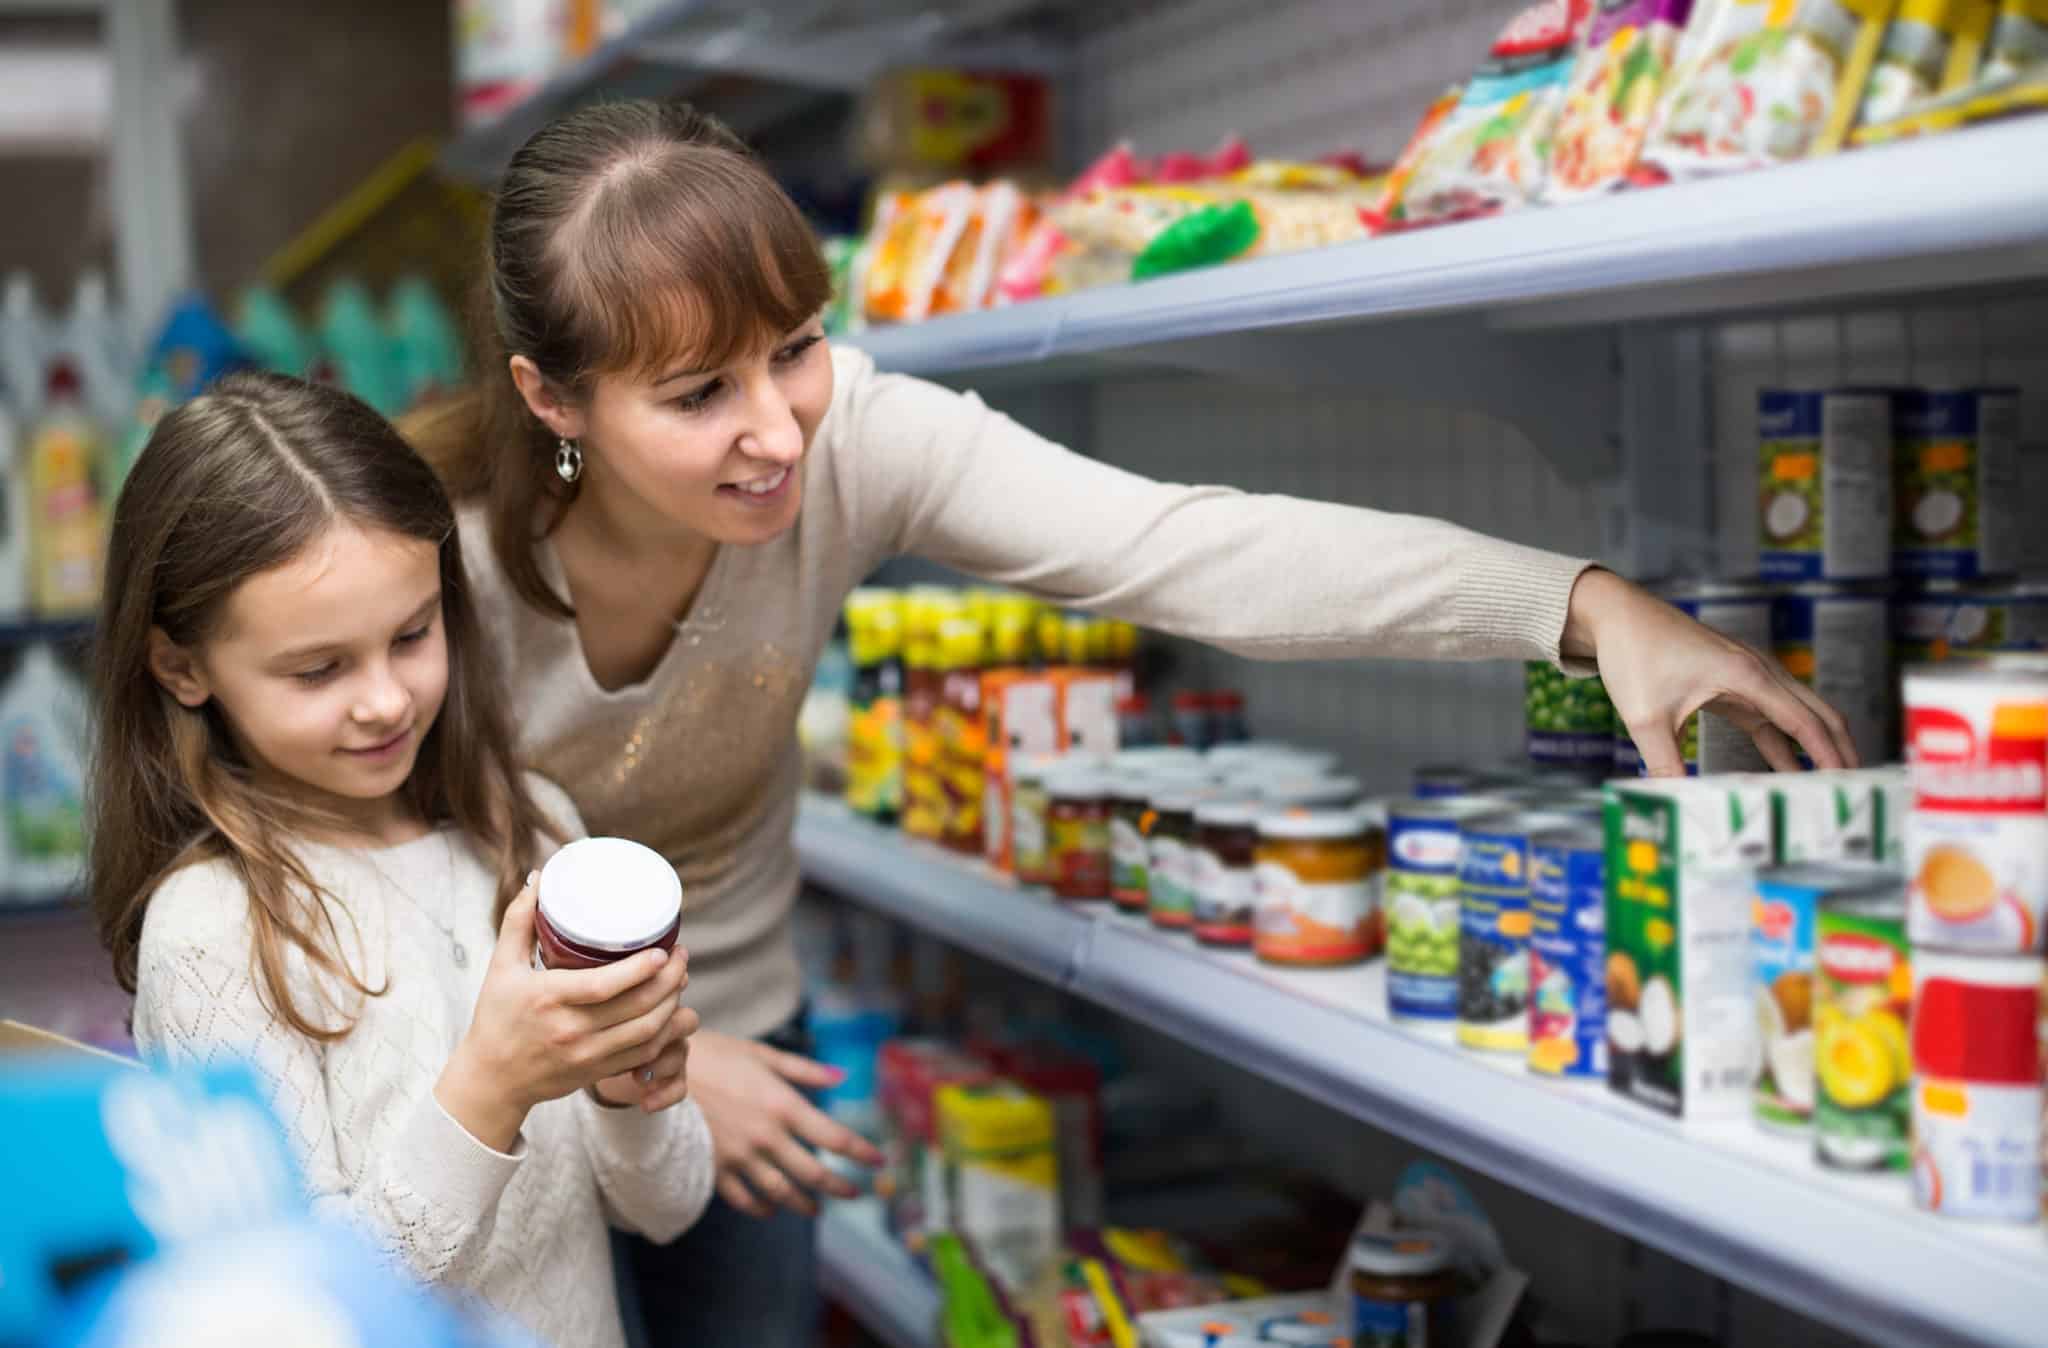 Mom and daughter in grocery store reading labels on canned goods